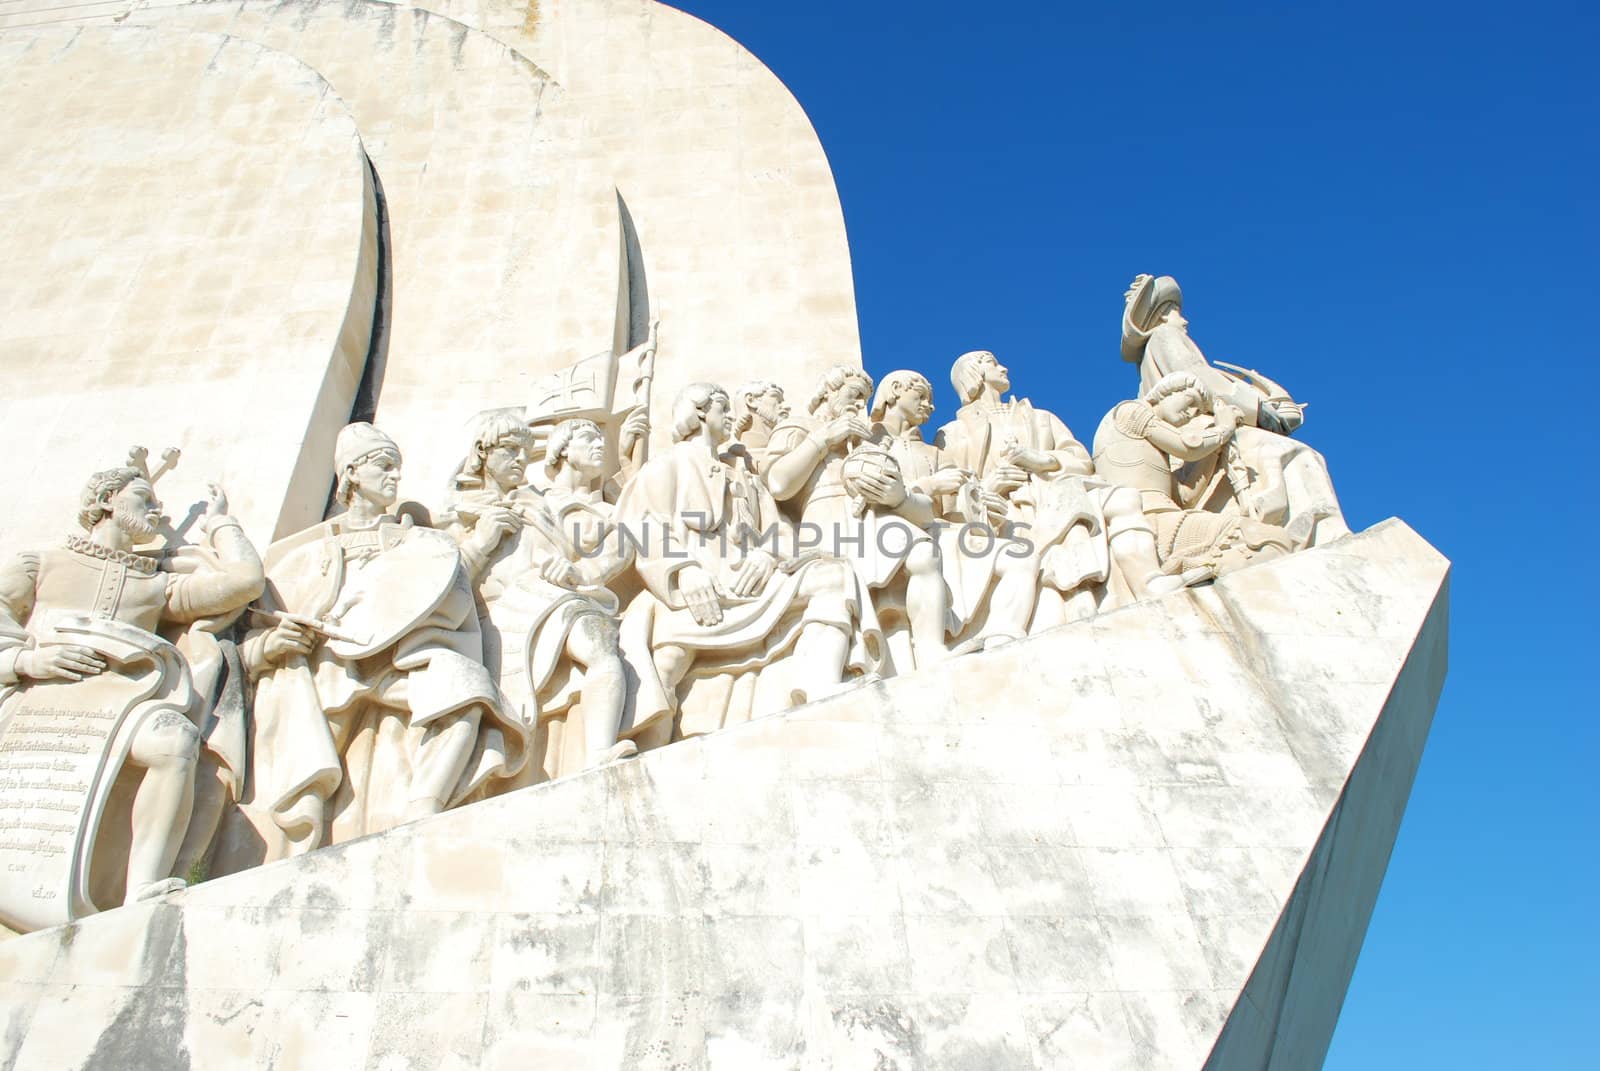 Sea Discoveries monument in Lisbon, Portugal by luissantos84